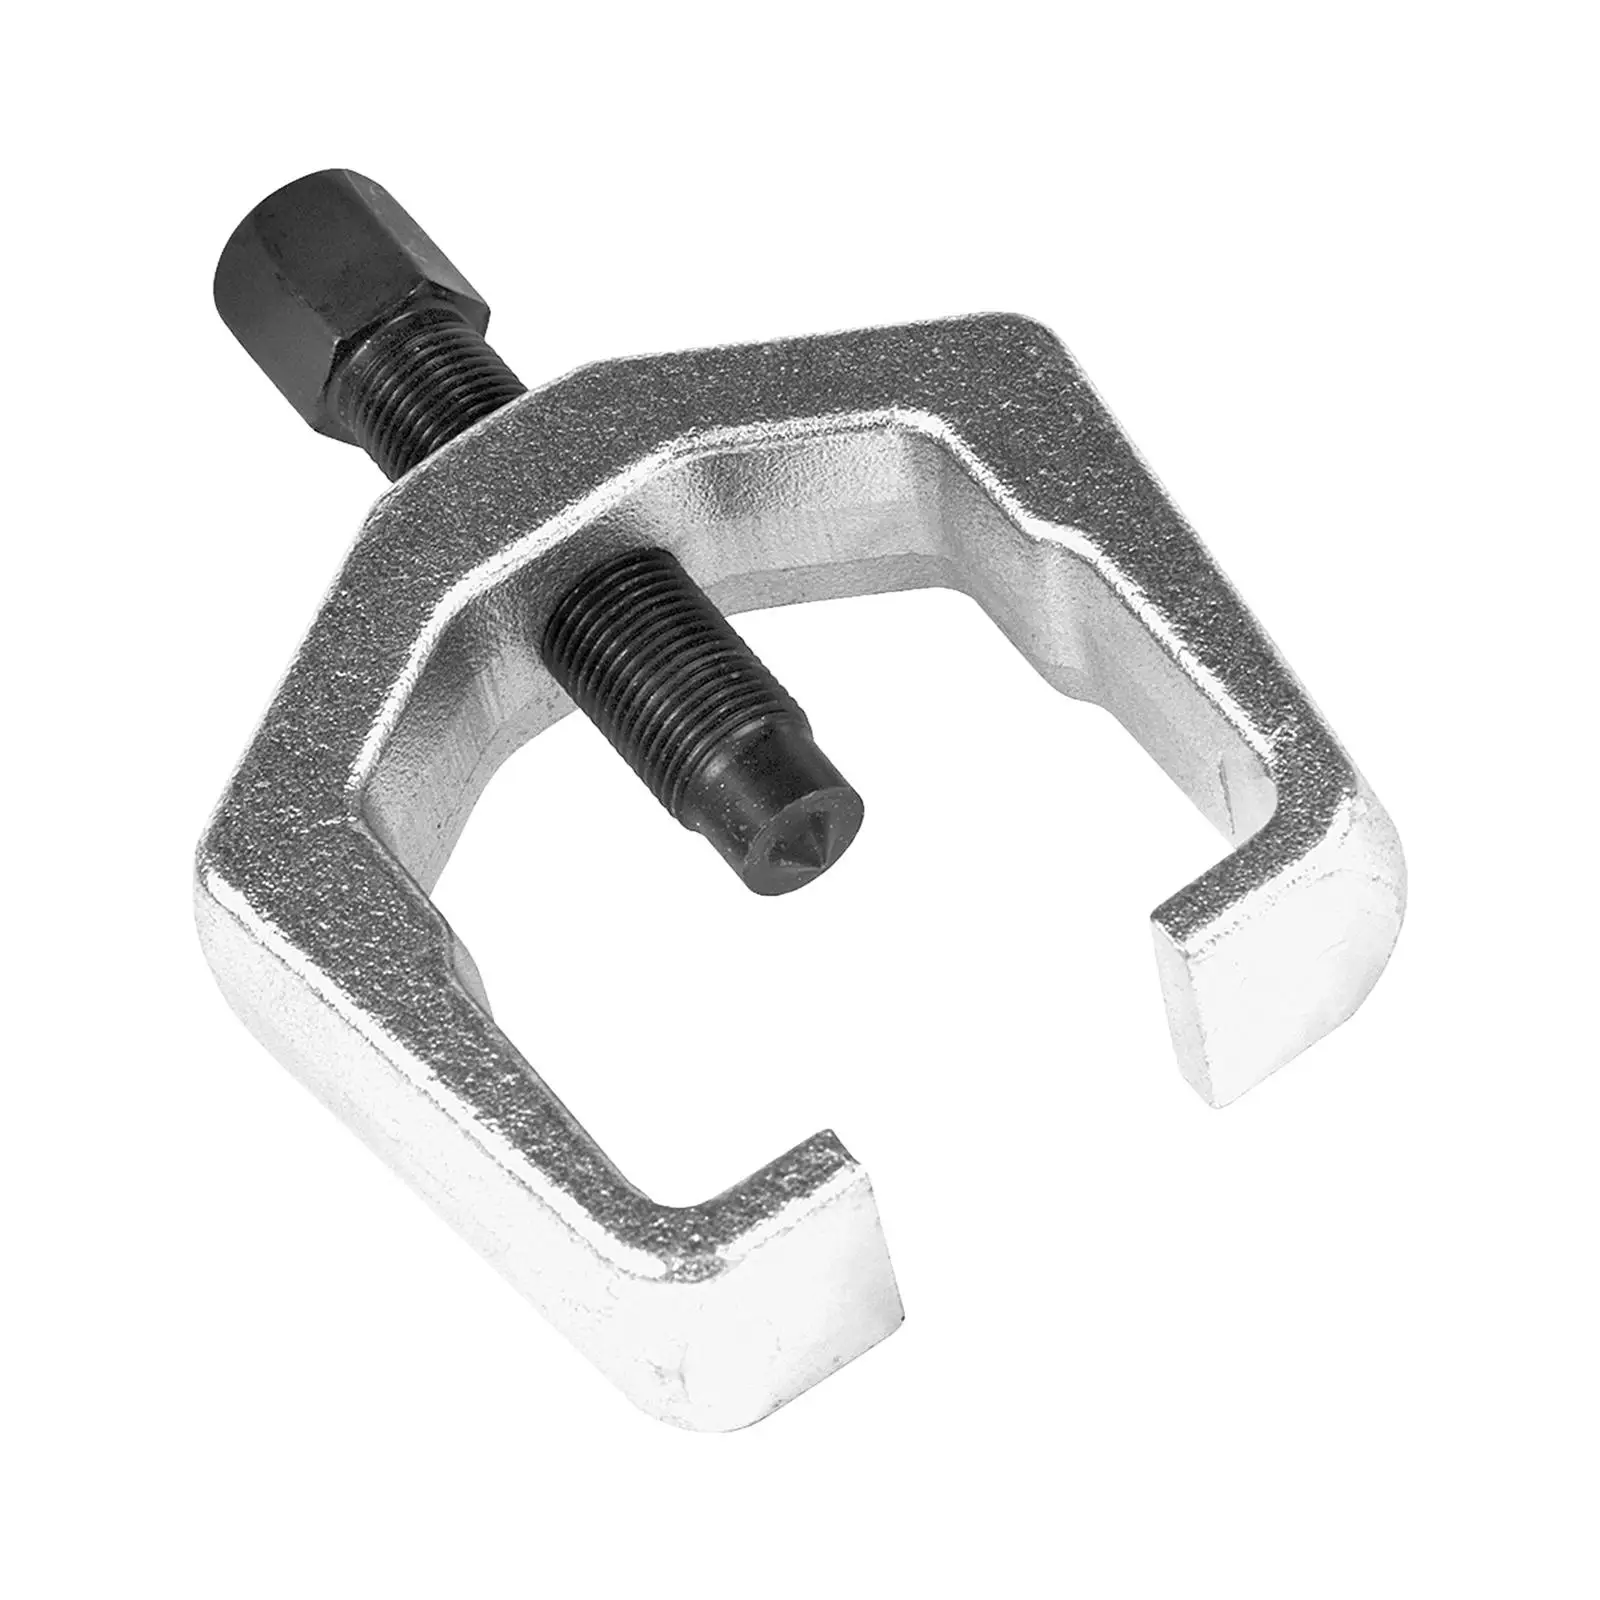 Slack Adjuster Puller High Performance Easy to Operate Pulley Puller Tool